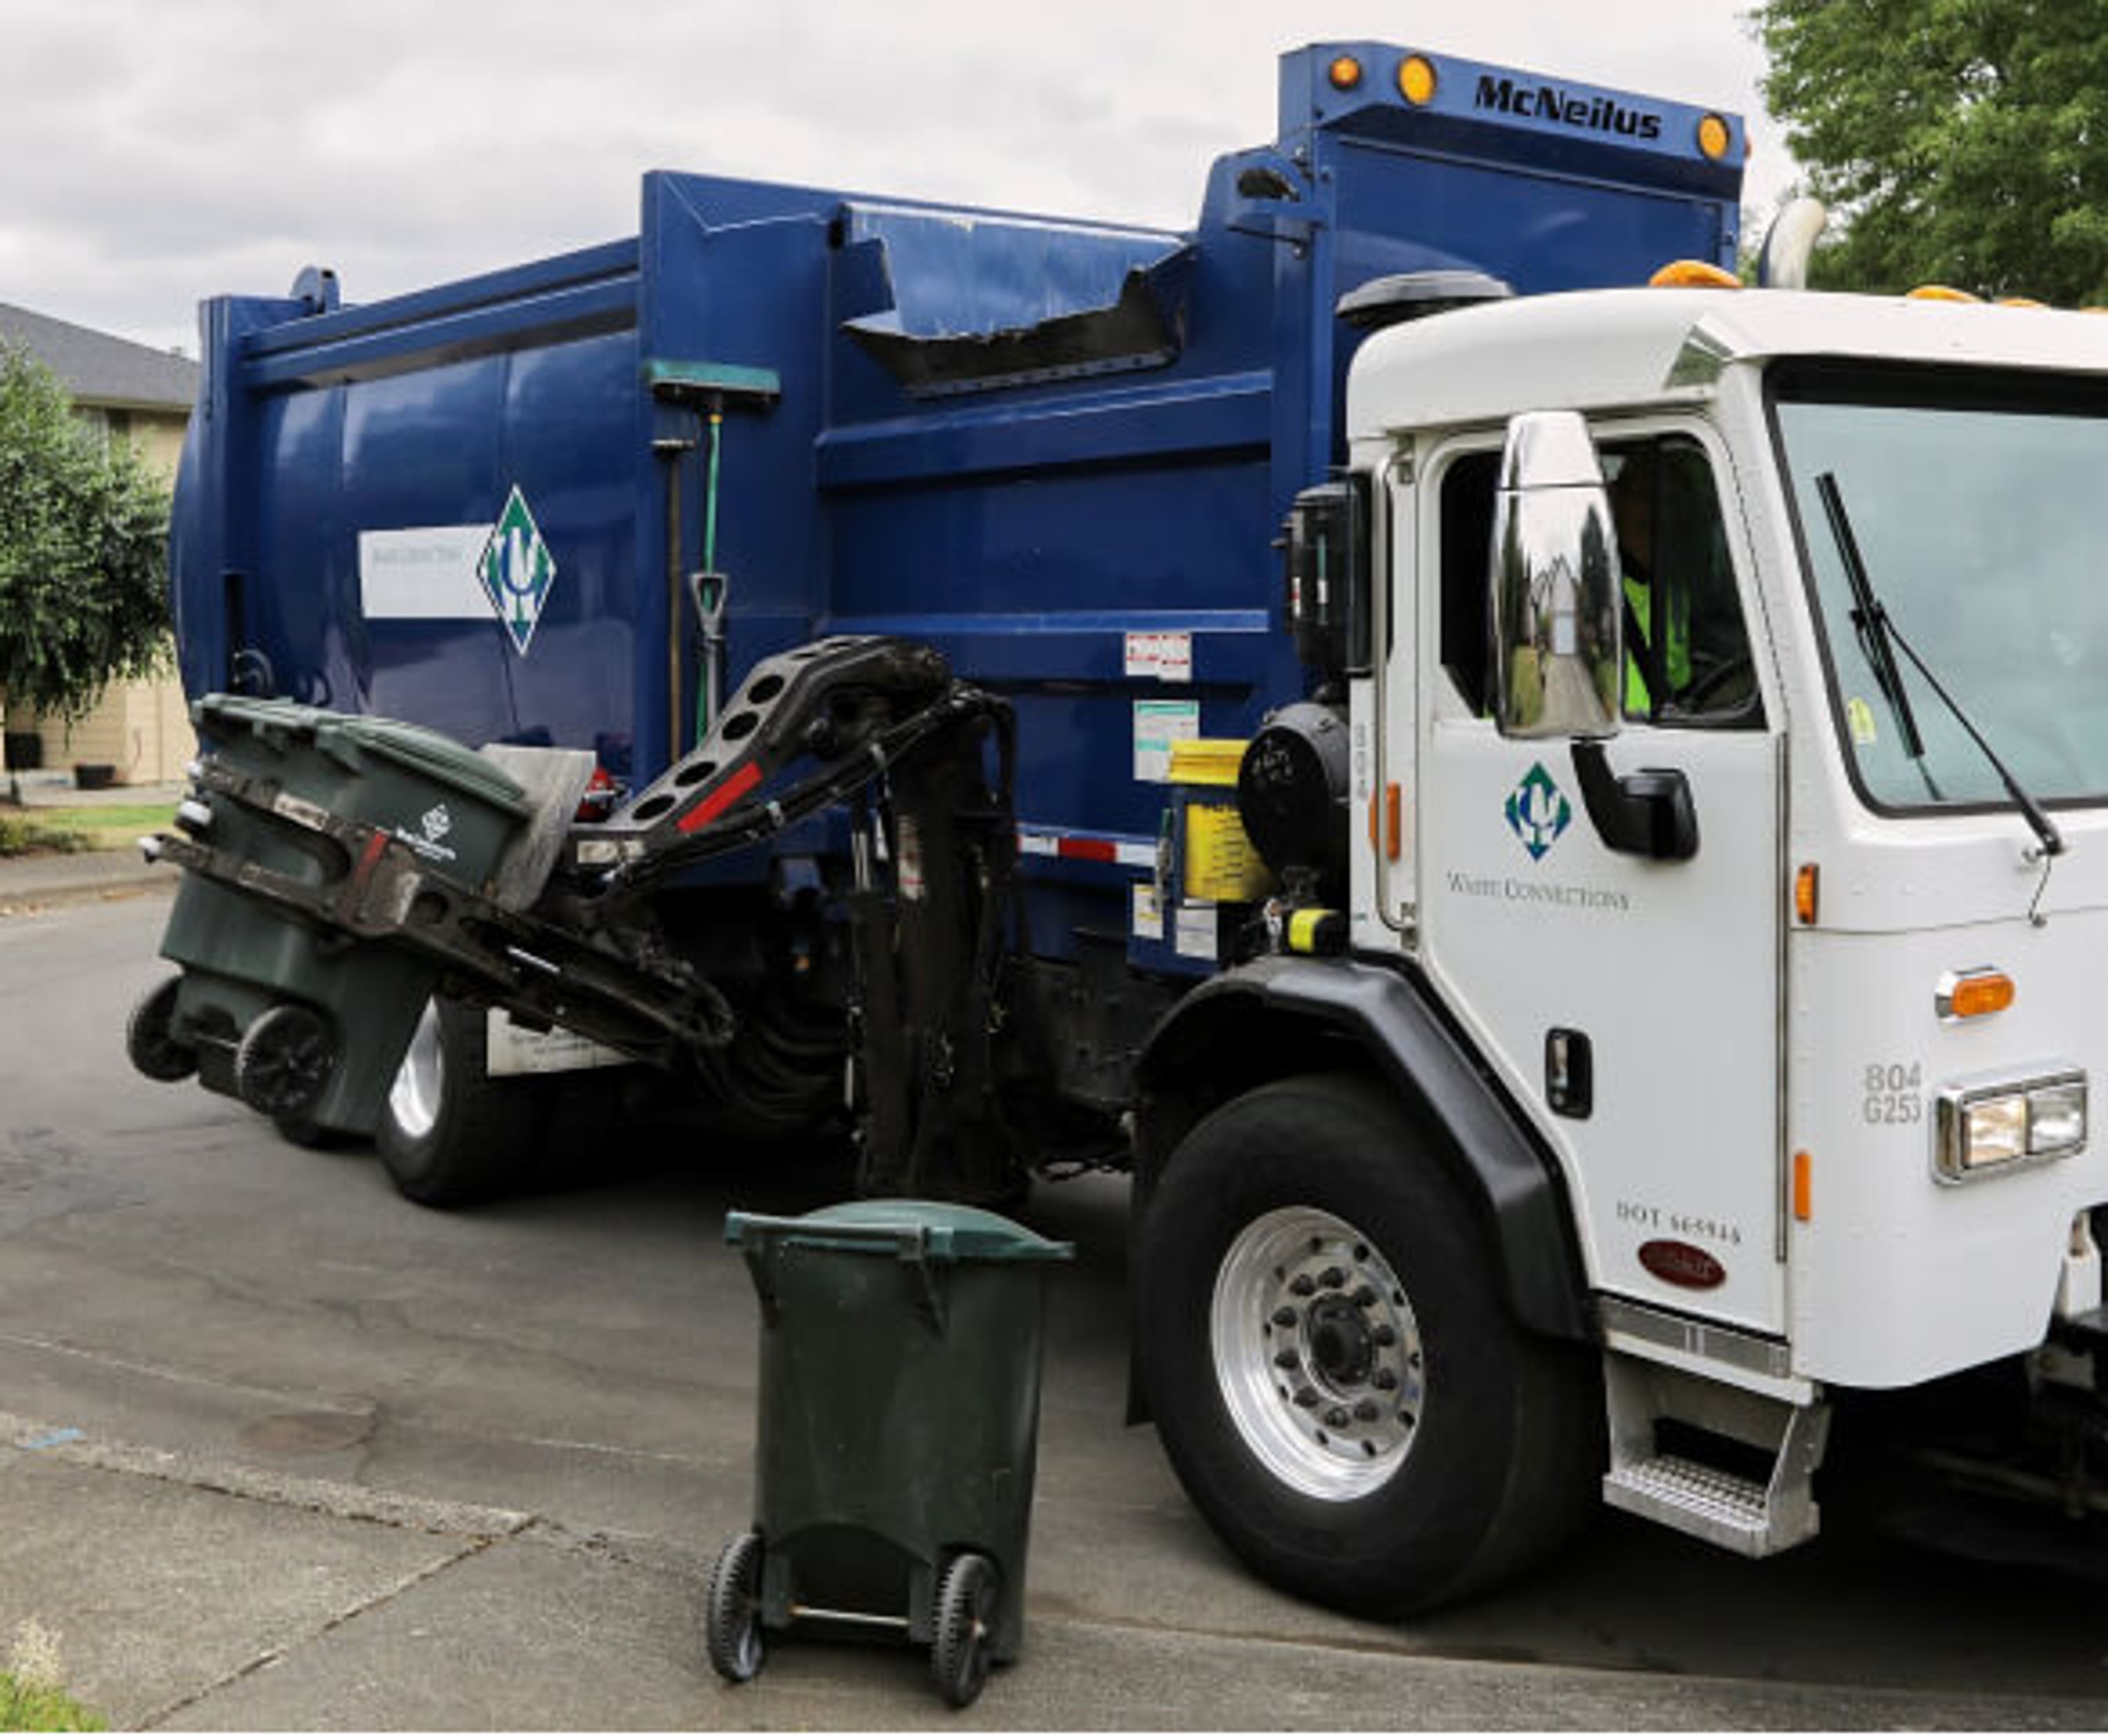 Waste Connections, a Cape Girardeau company,  has provided the service to the city’s residents since 2014.